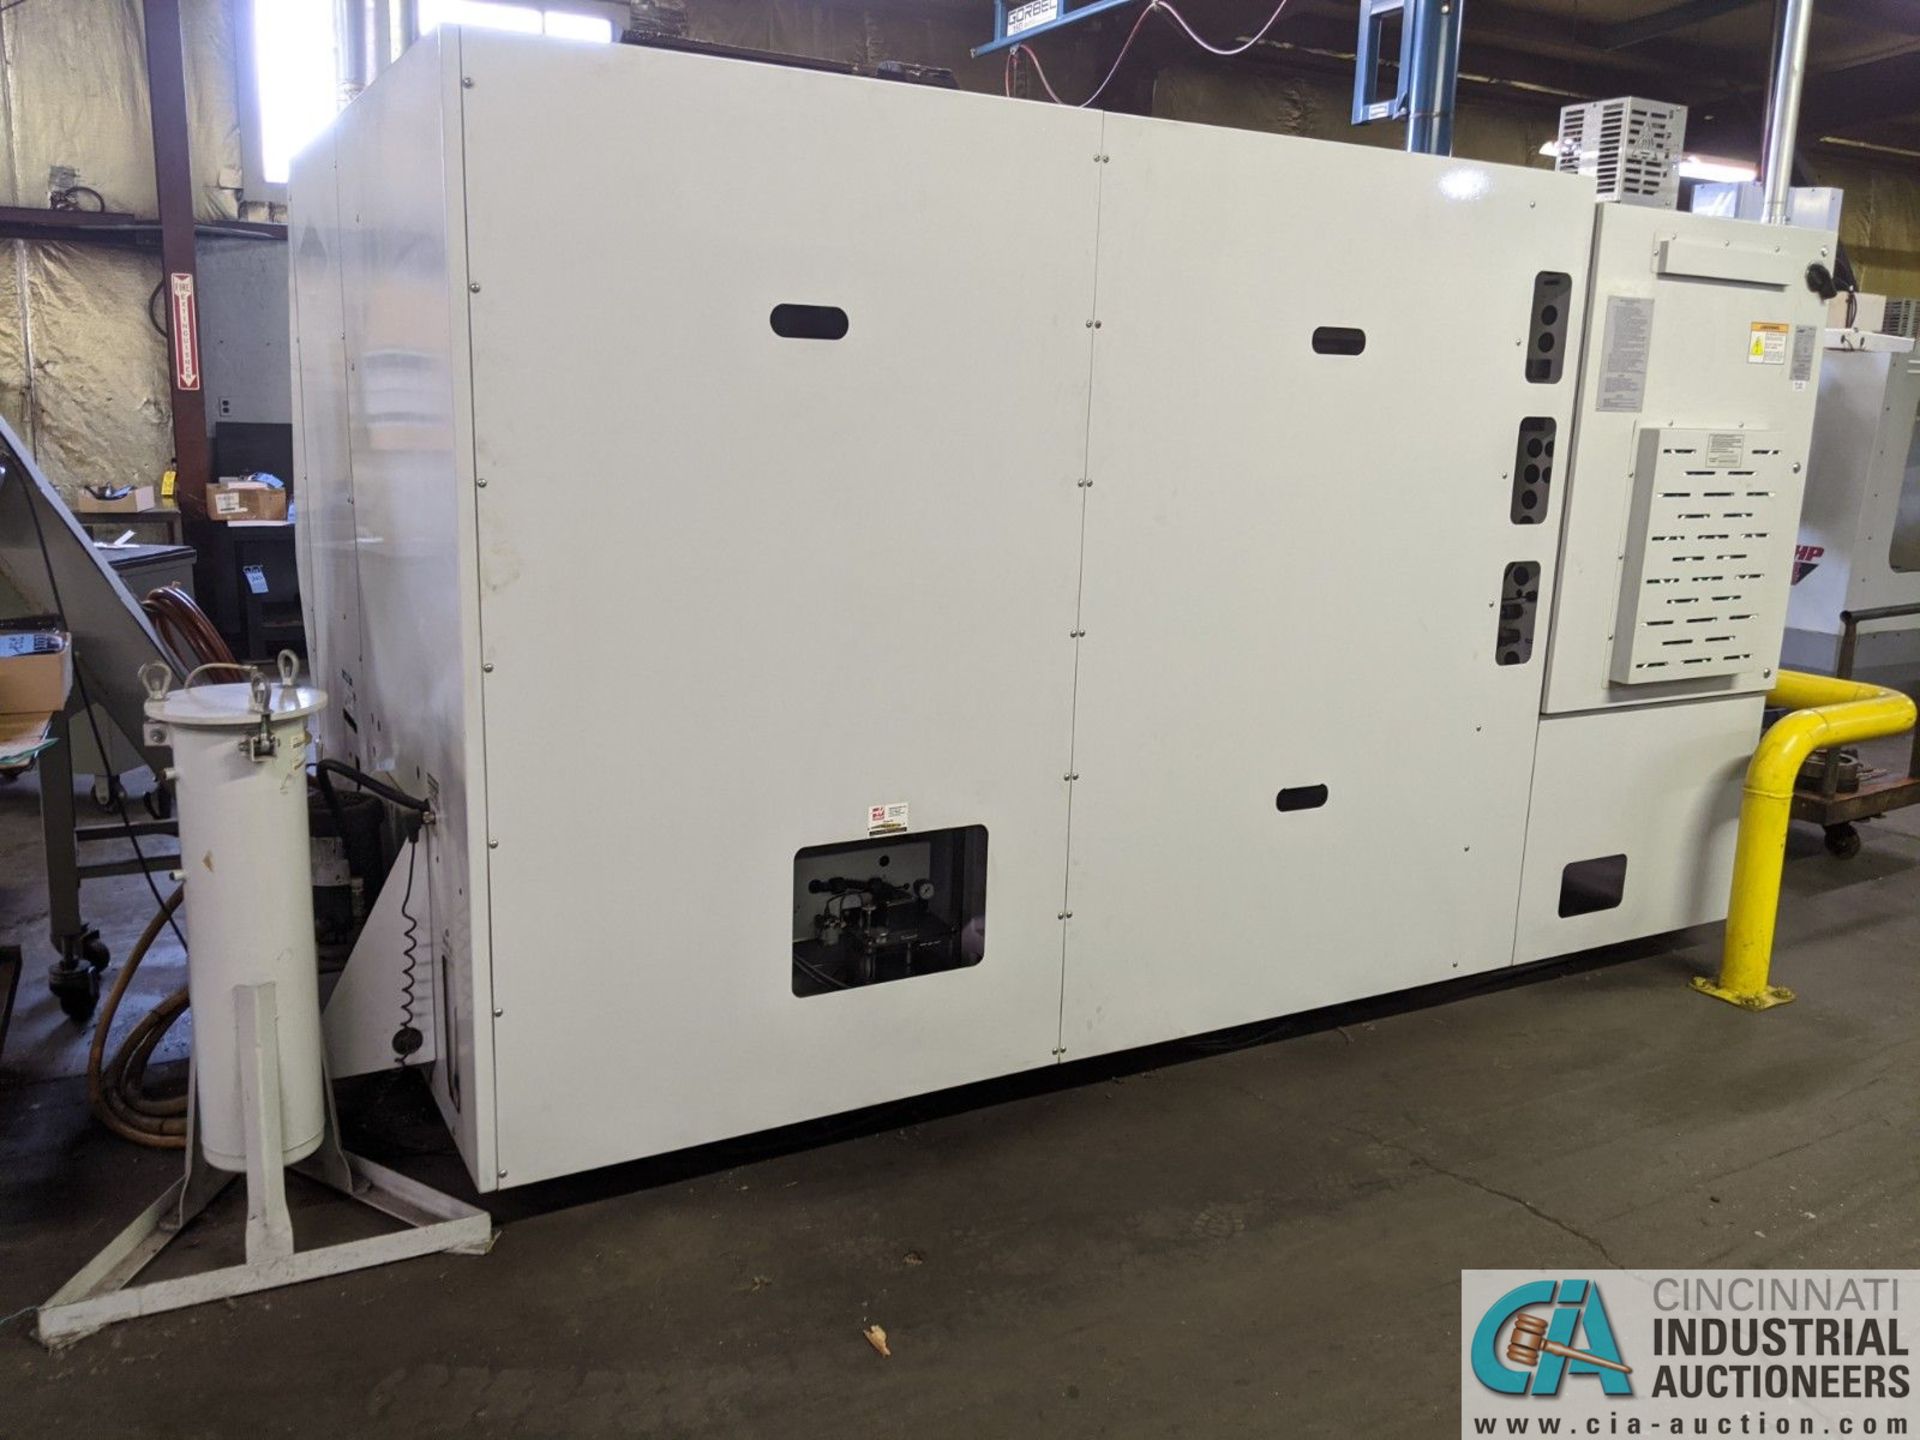 HAAS MODEL SL-40T CNC TURNING CENTER; S/N 69082, 18" 3-JAW CHUCK, 10 POSITION TURRET, TAILSTOCK, - Image 5 of 14